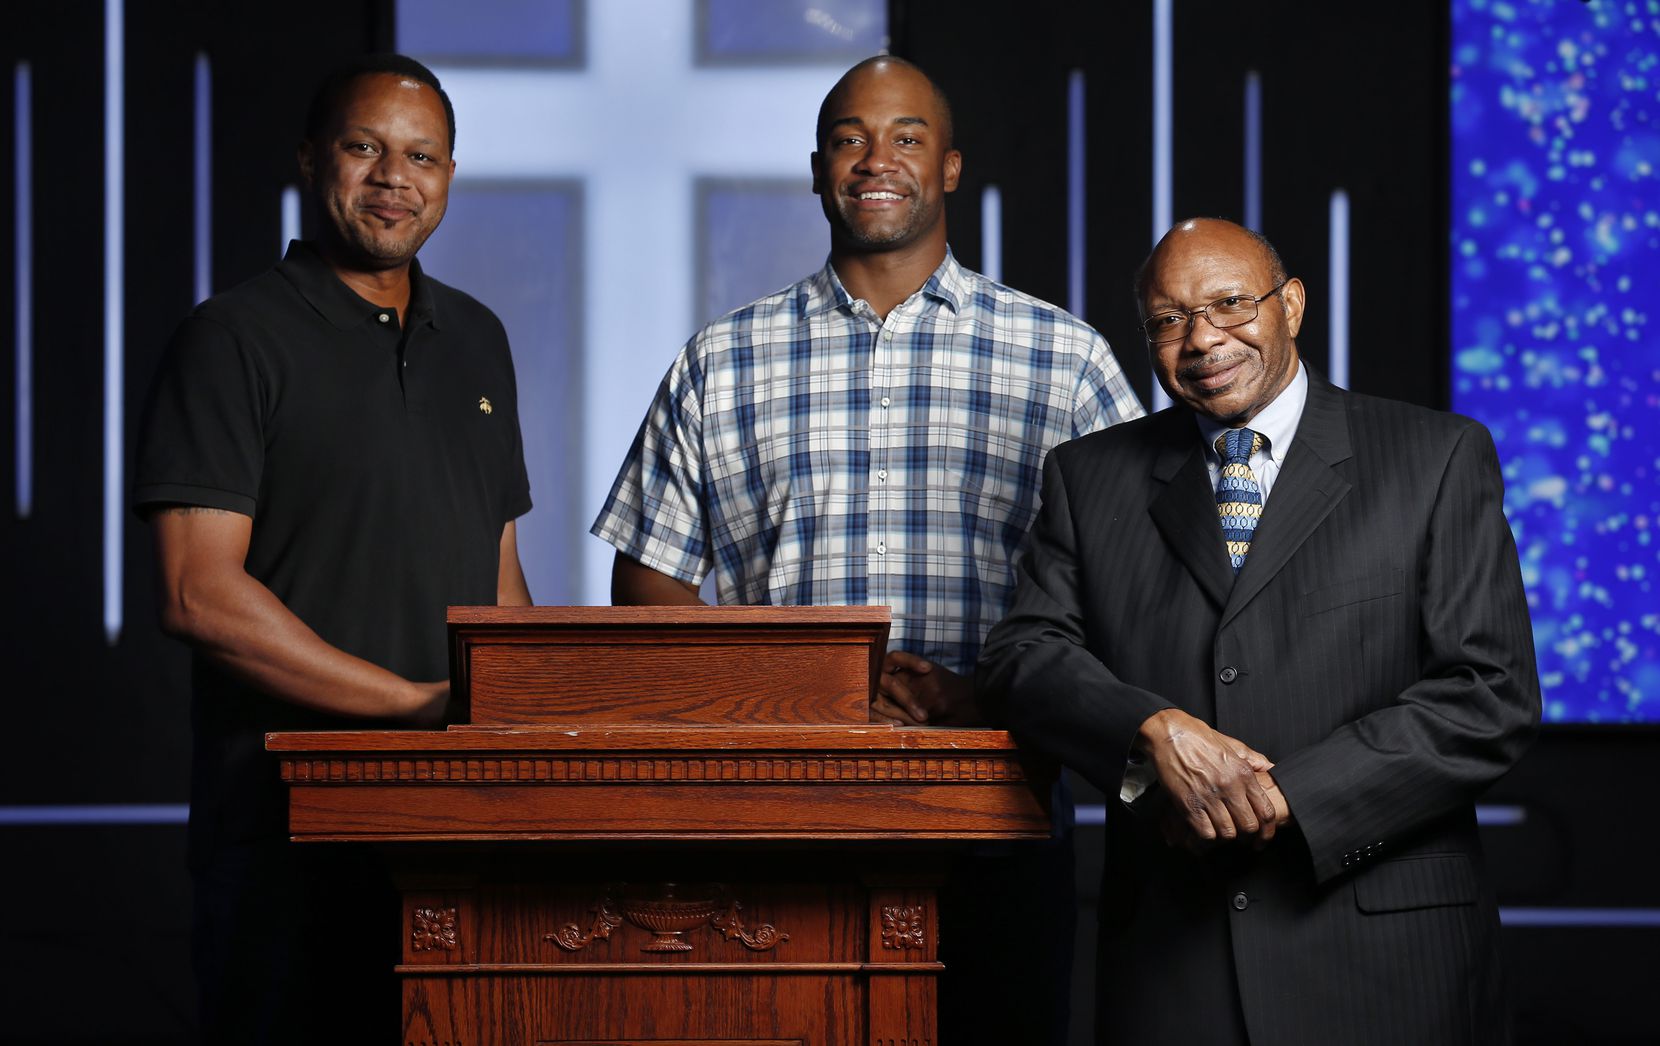 Pastor Chris Simmons (right) at the lectern with Donald Wesson (center), program director of...